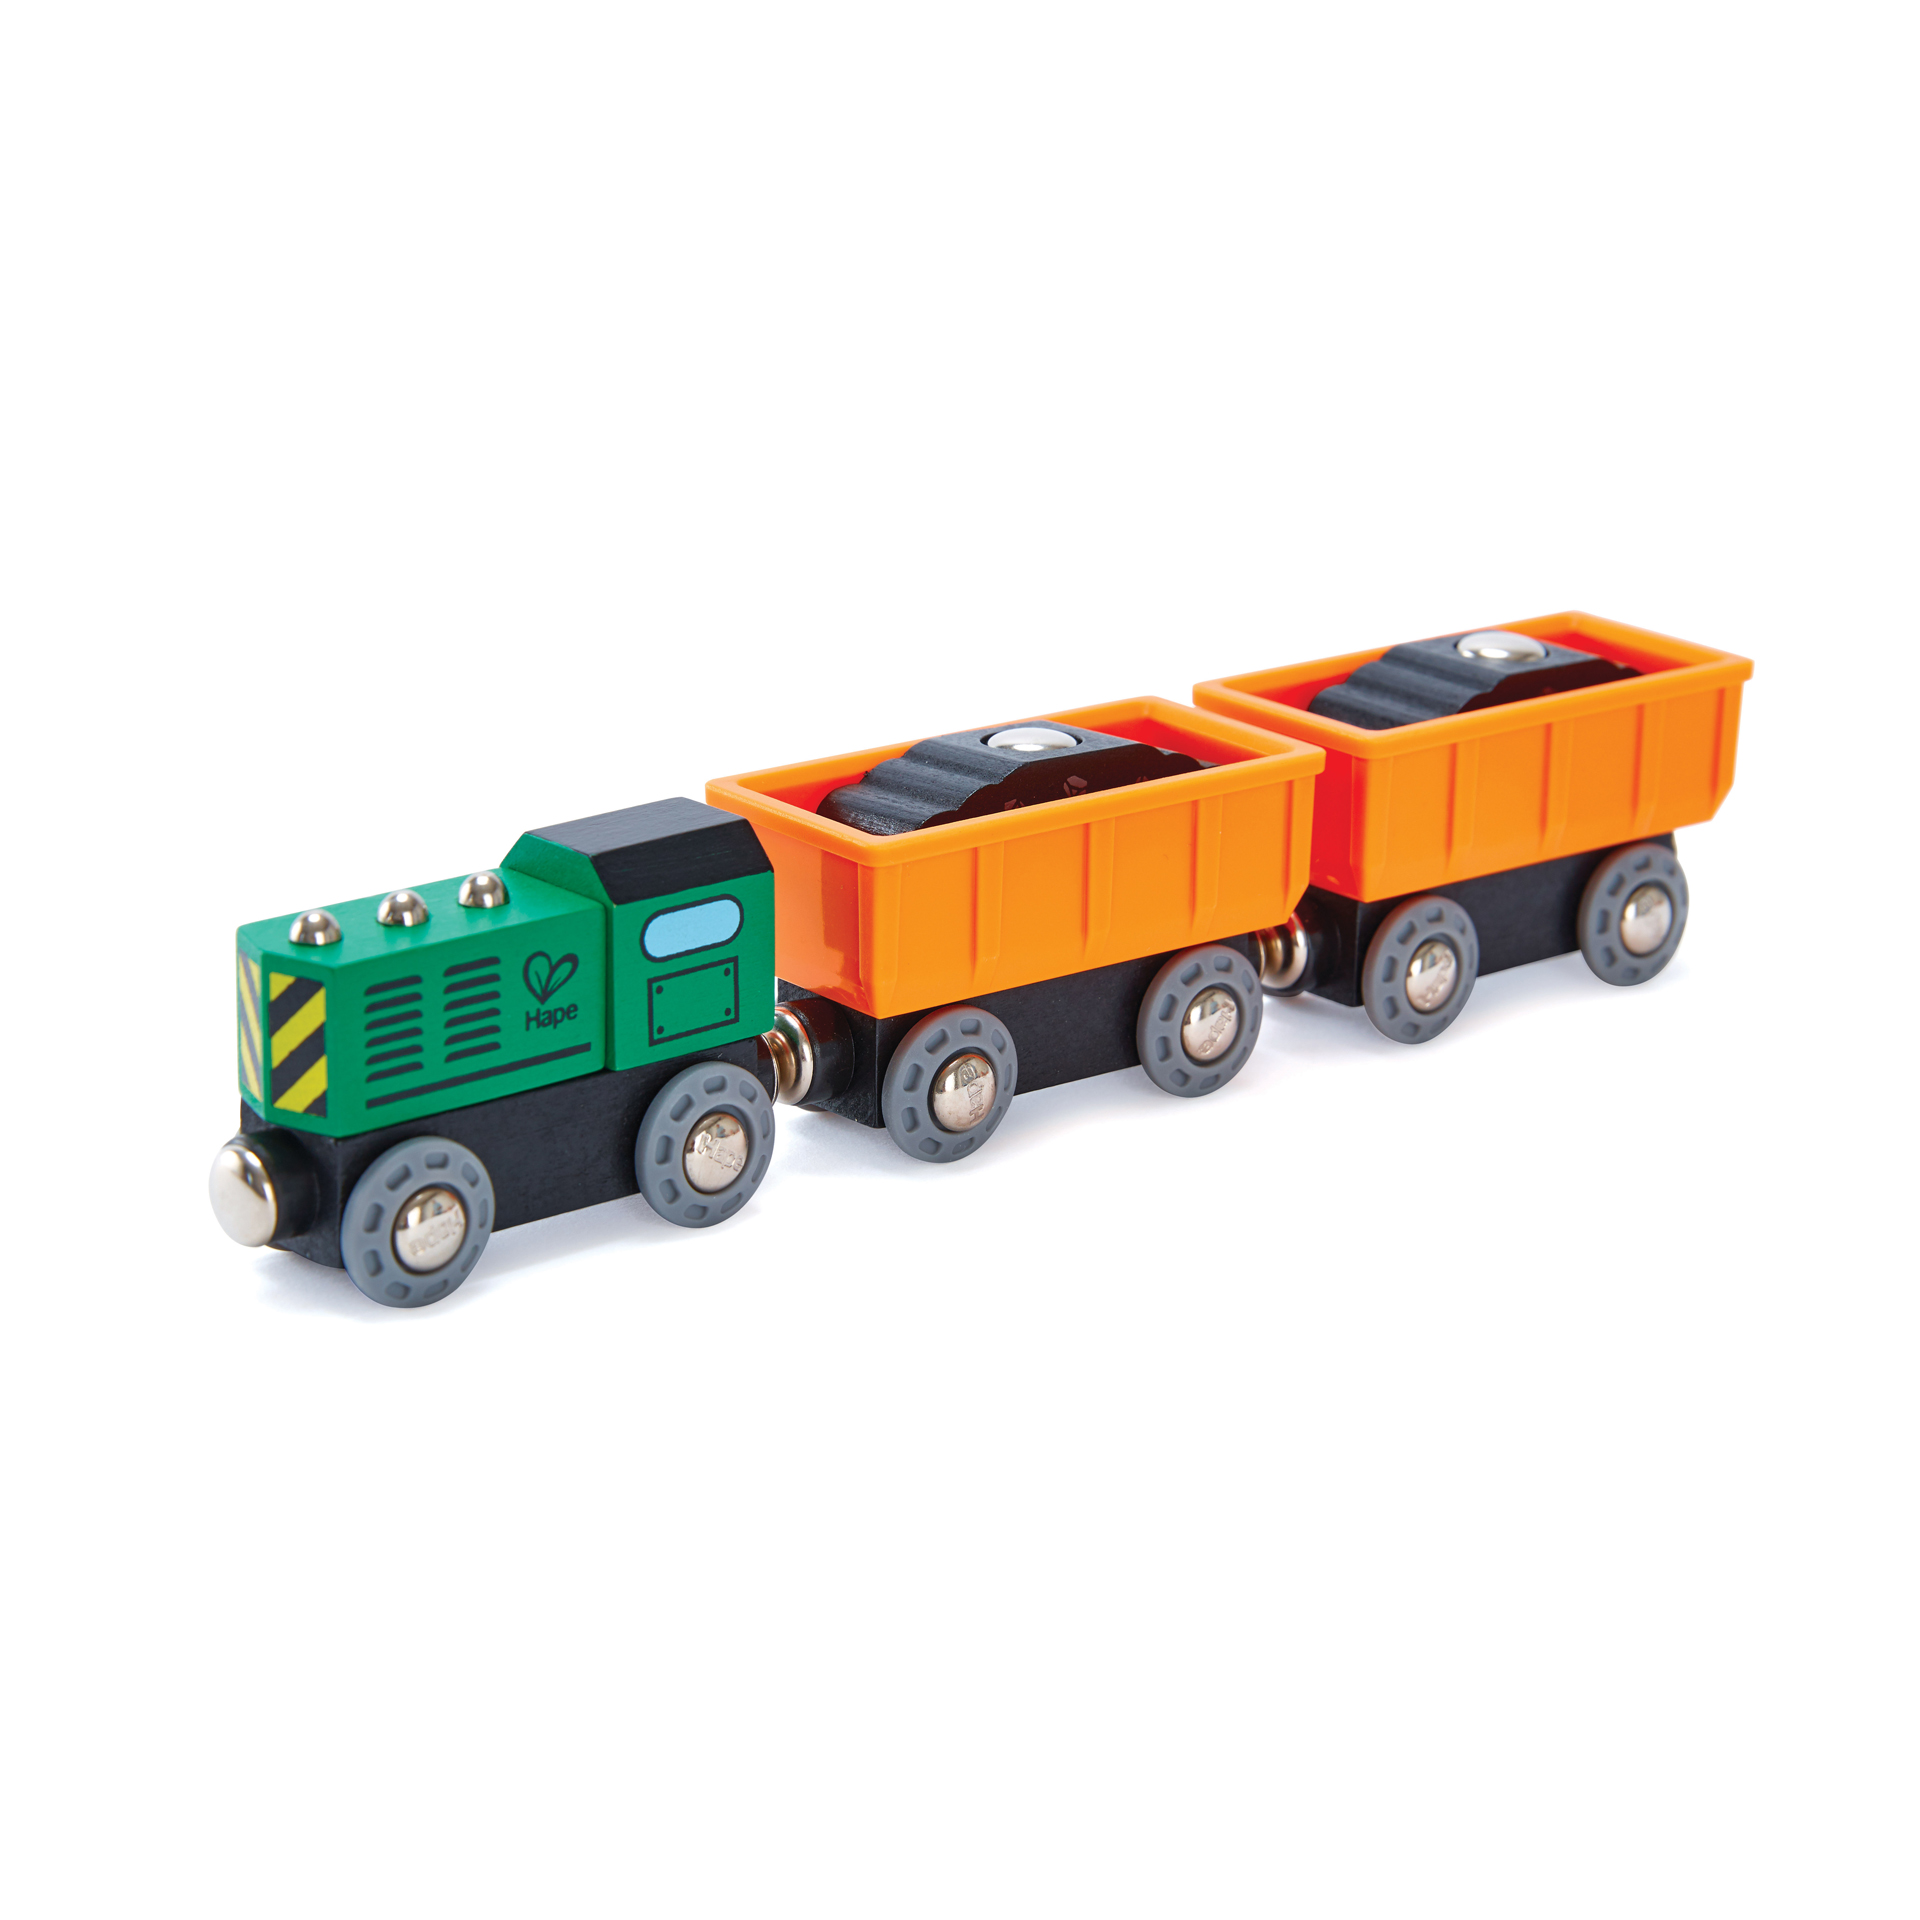 Hape Diesel Freight Train | Classic Children’s Locomotive With Loaded Freight Wagons, Interactive Toy For Kids